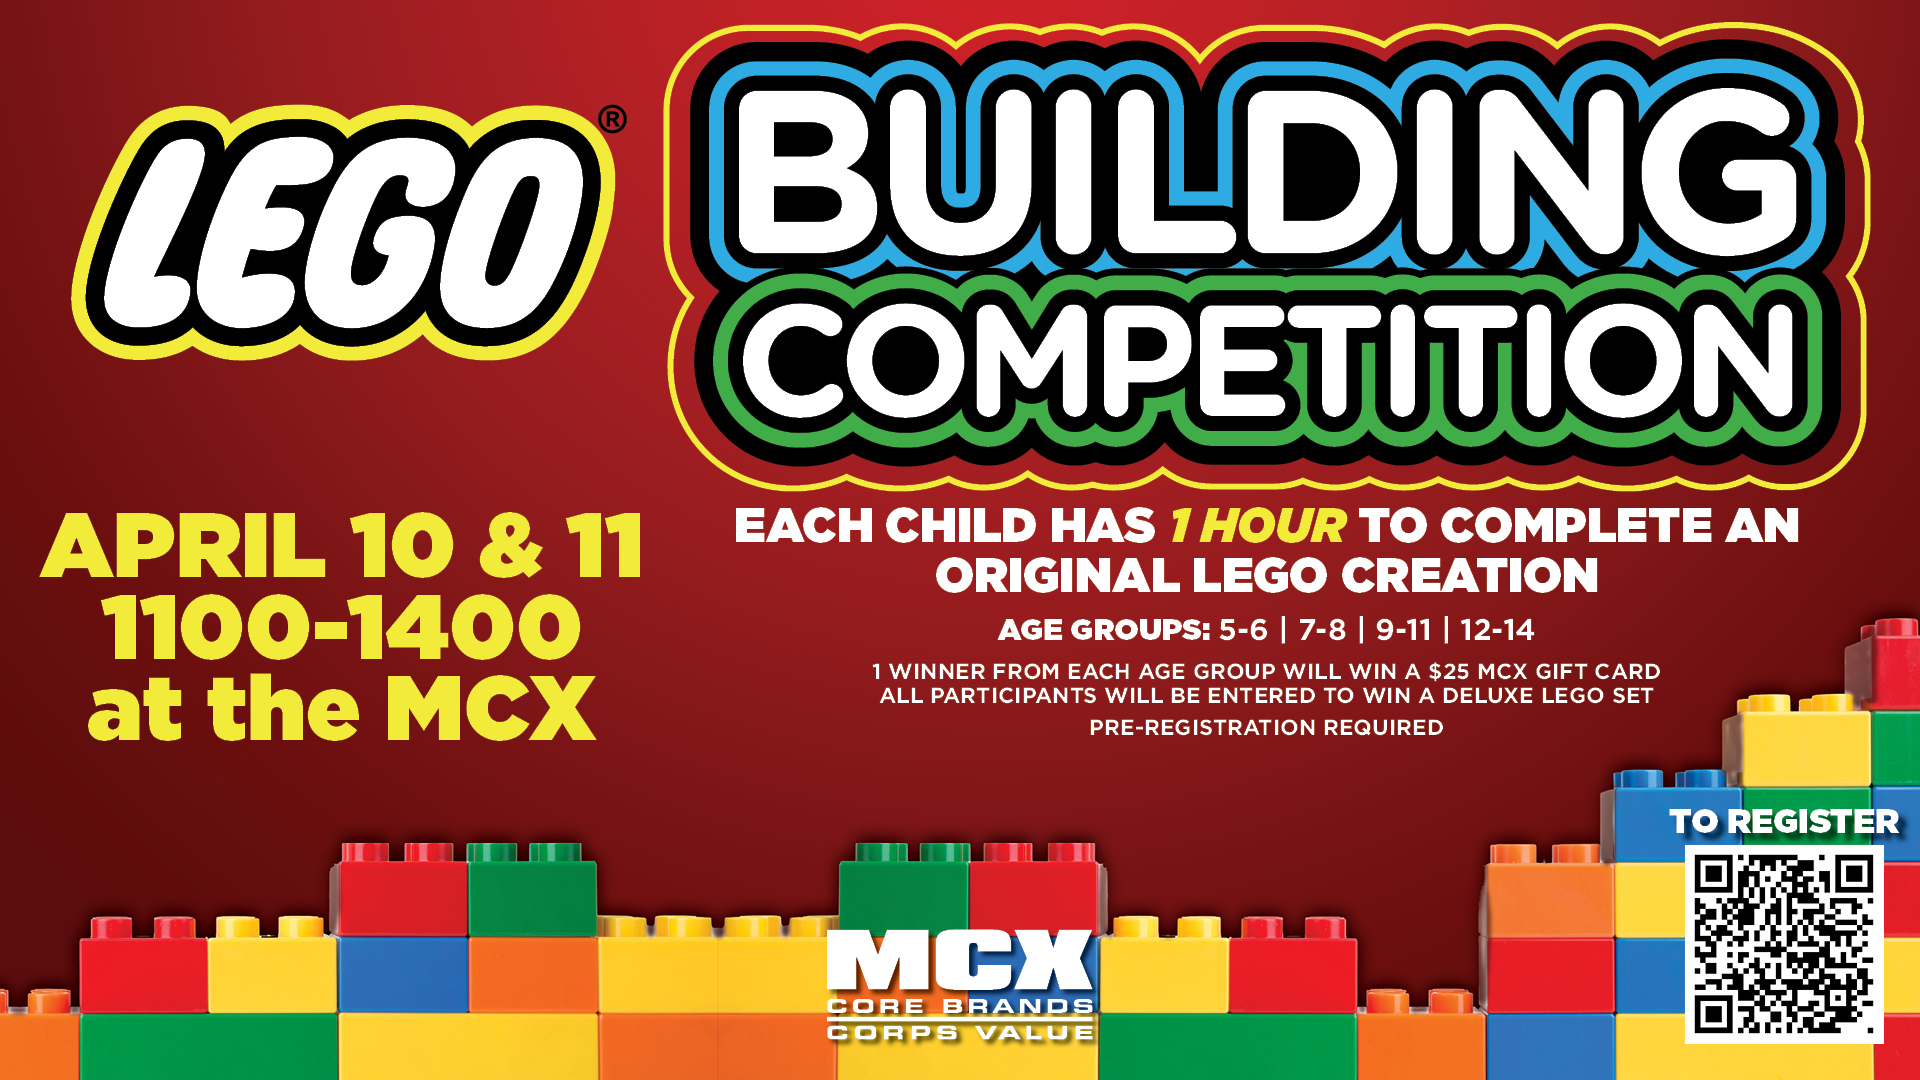 Lego Building Competition